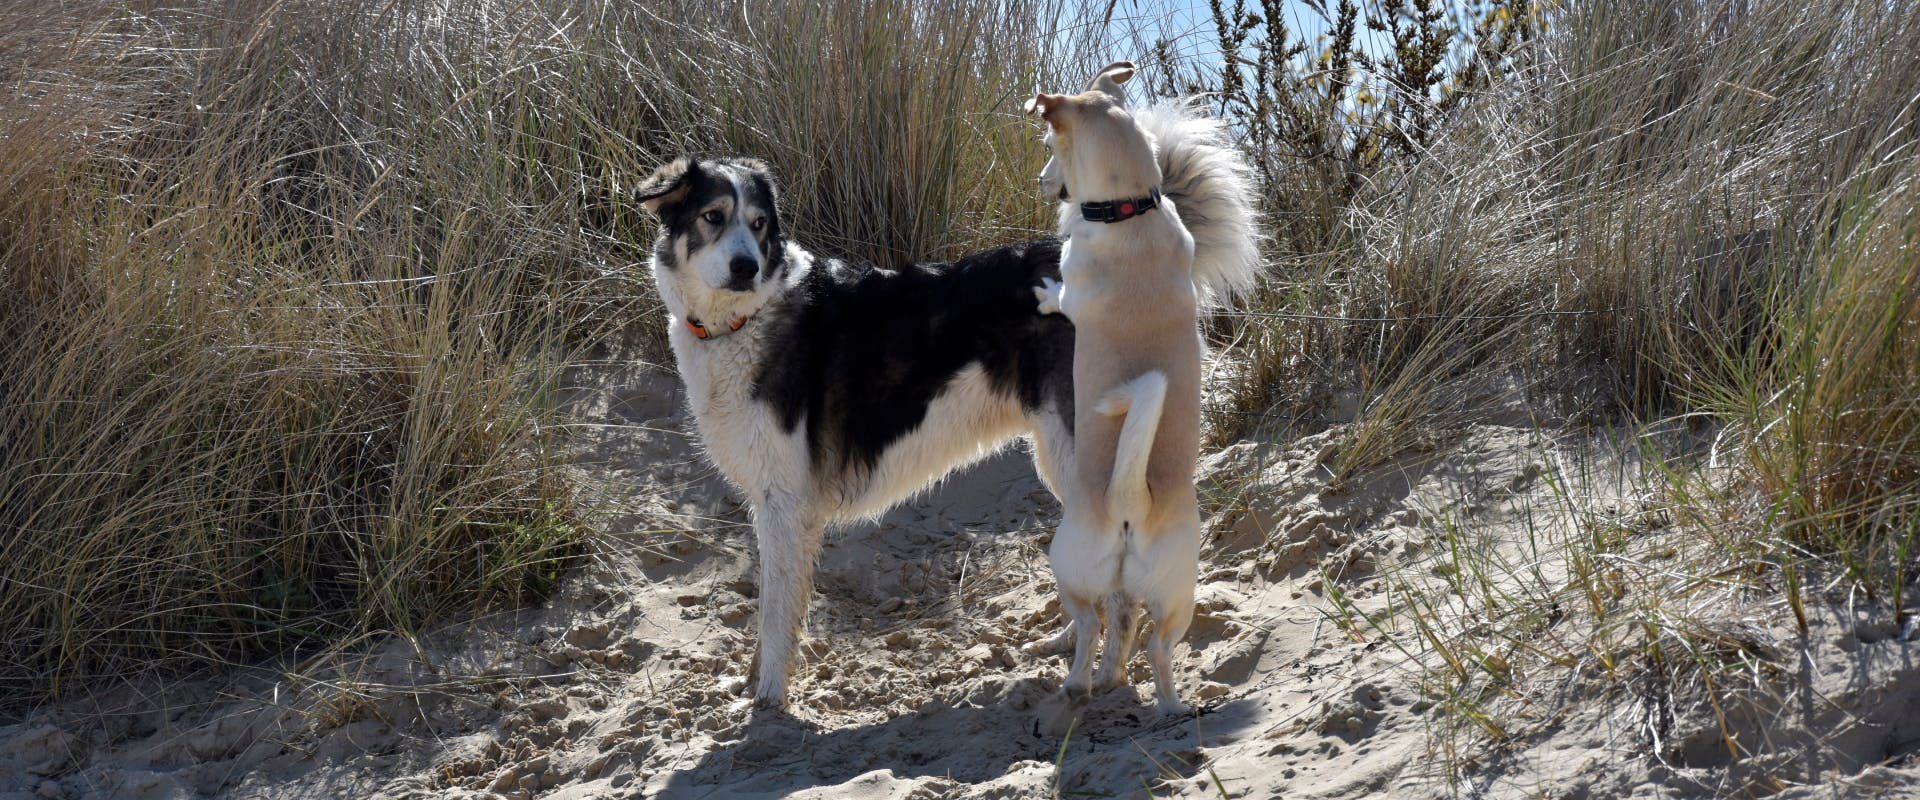 a large dog stood on a sand dune facing another smaller dog that is on its hind legs and has its front paws on the large dog's behind